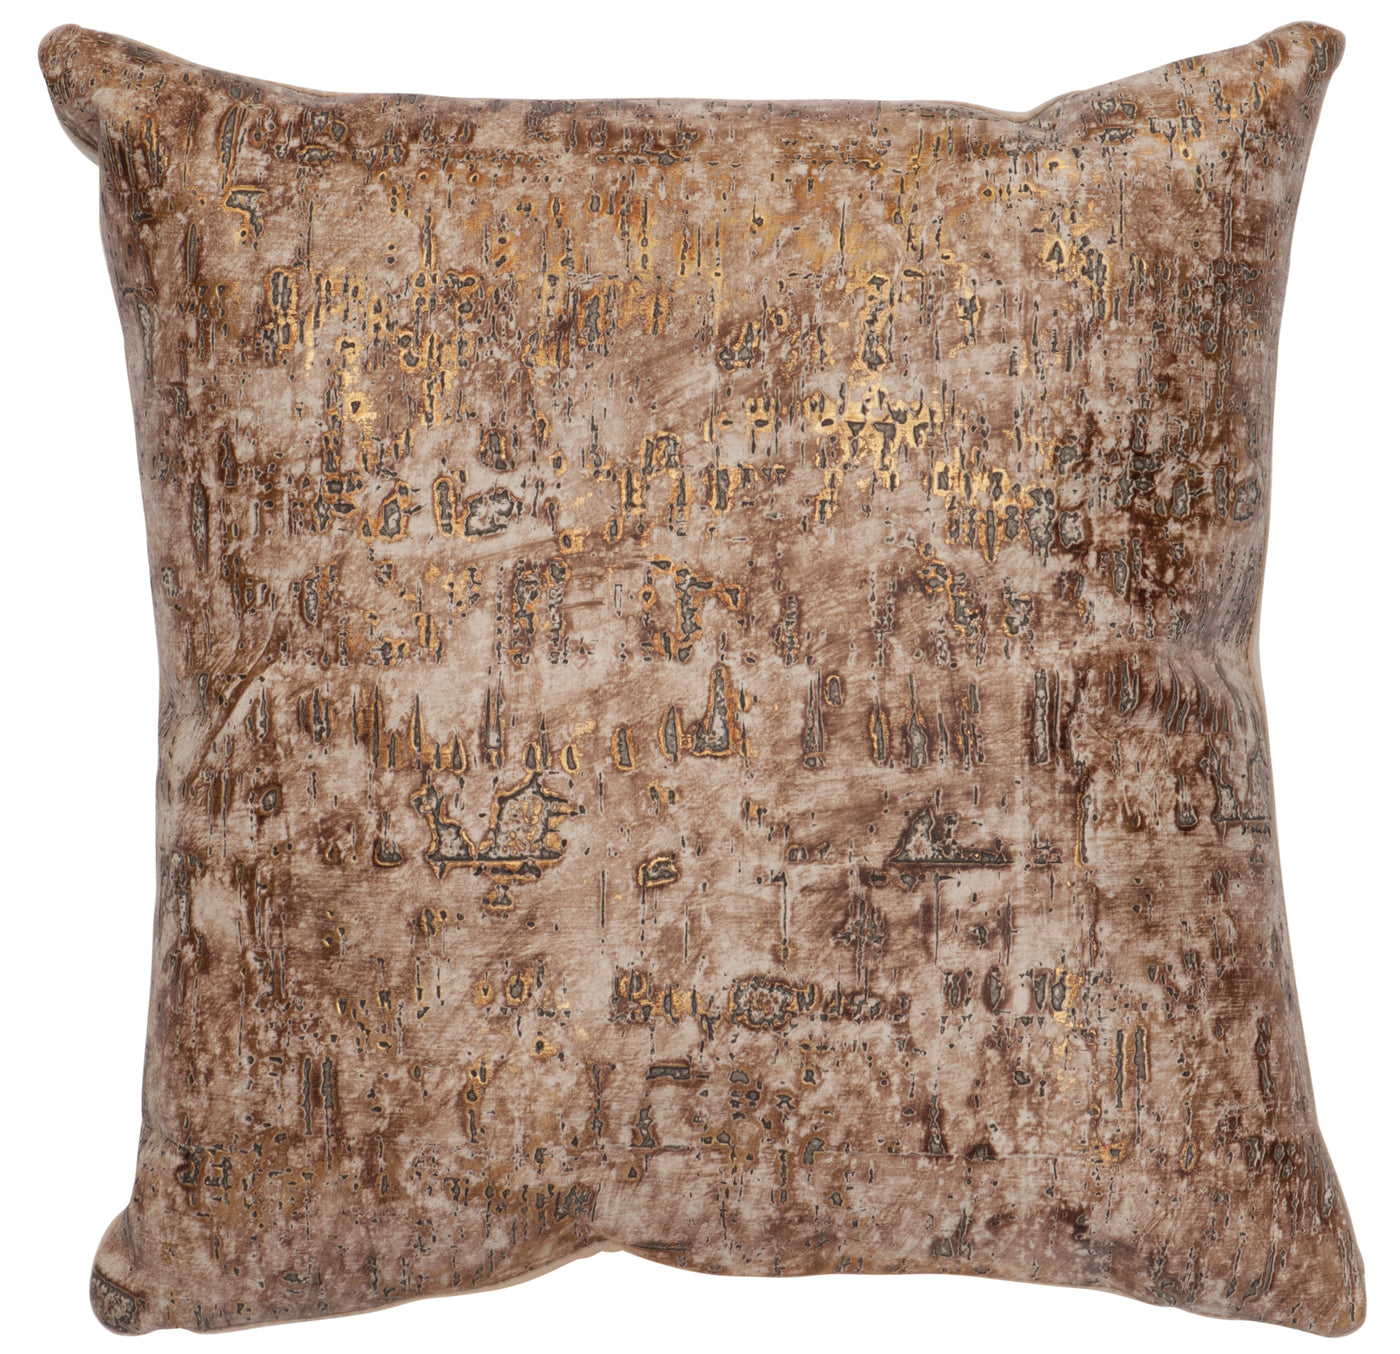 Canvello Speckled Light Brown Leather Pillow - Fabric Back - 12"x18"